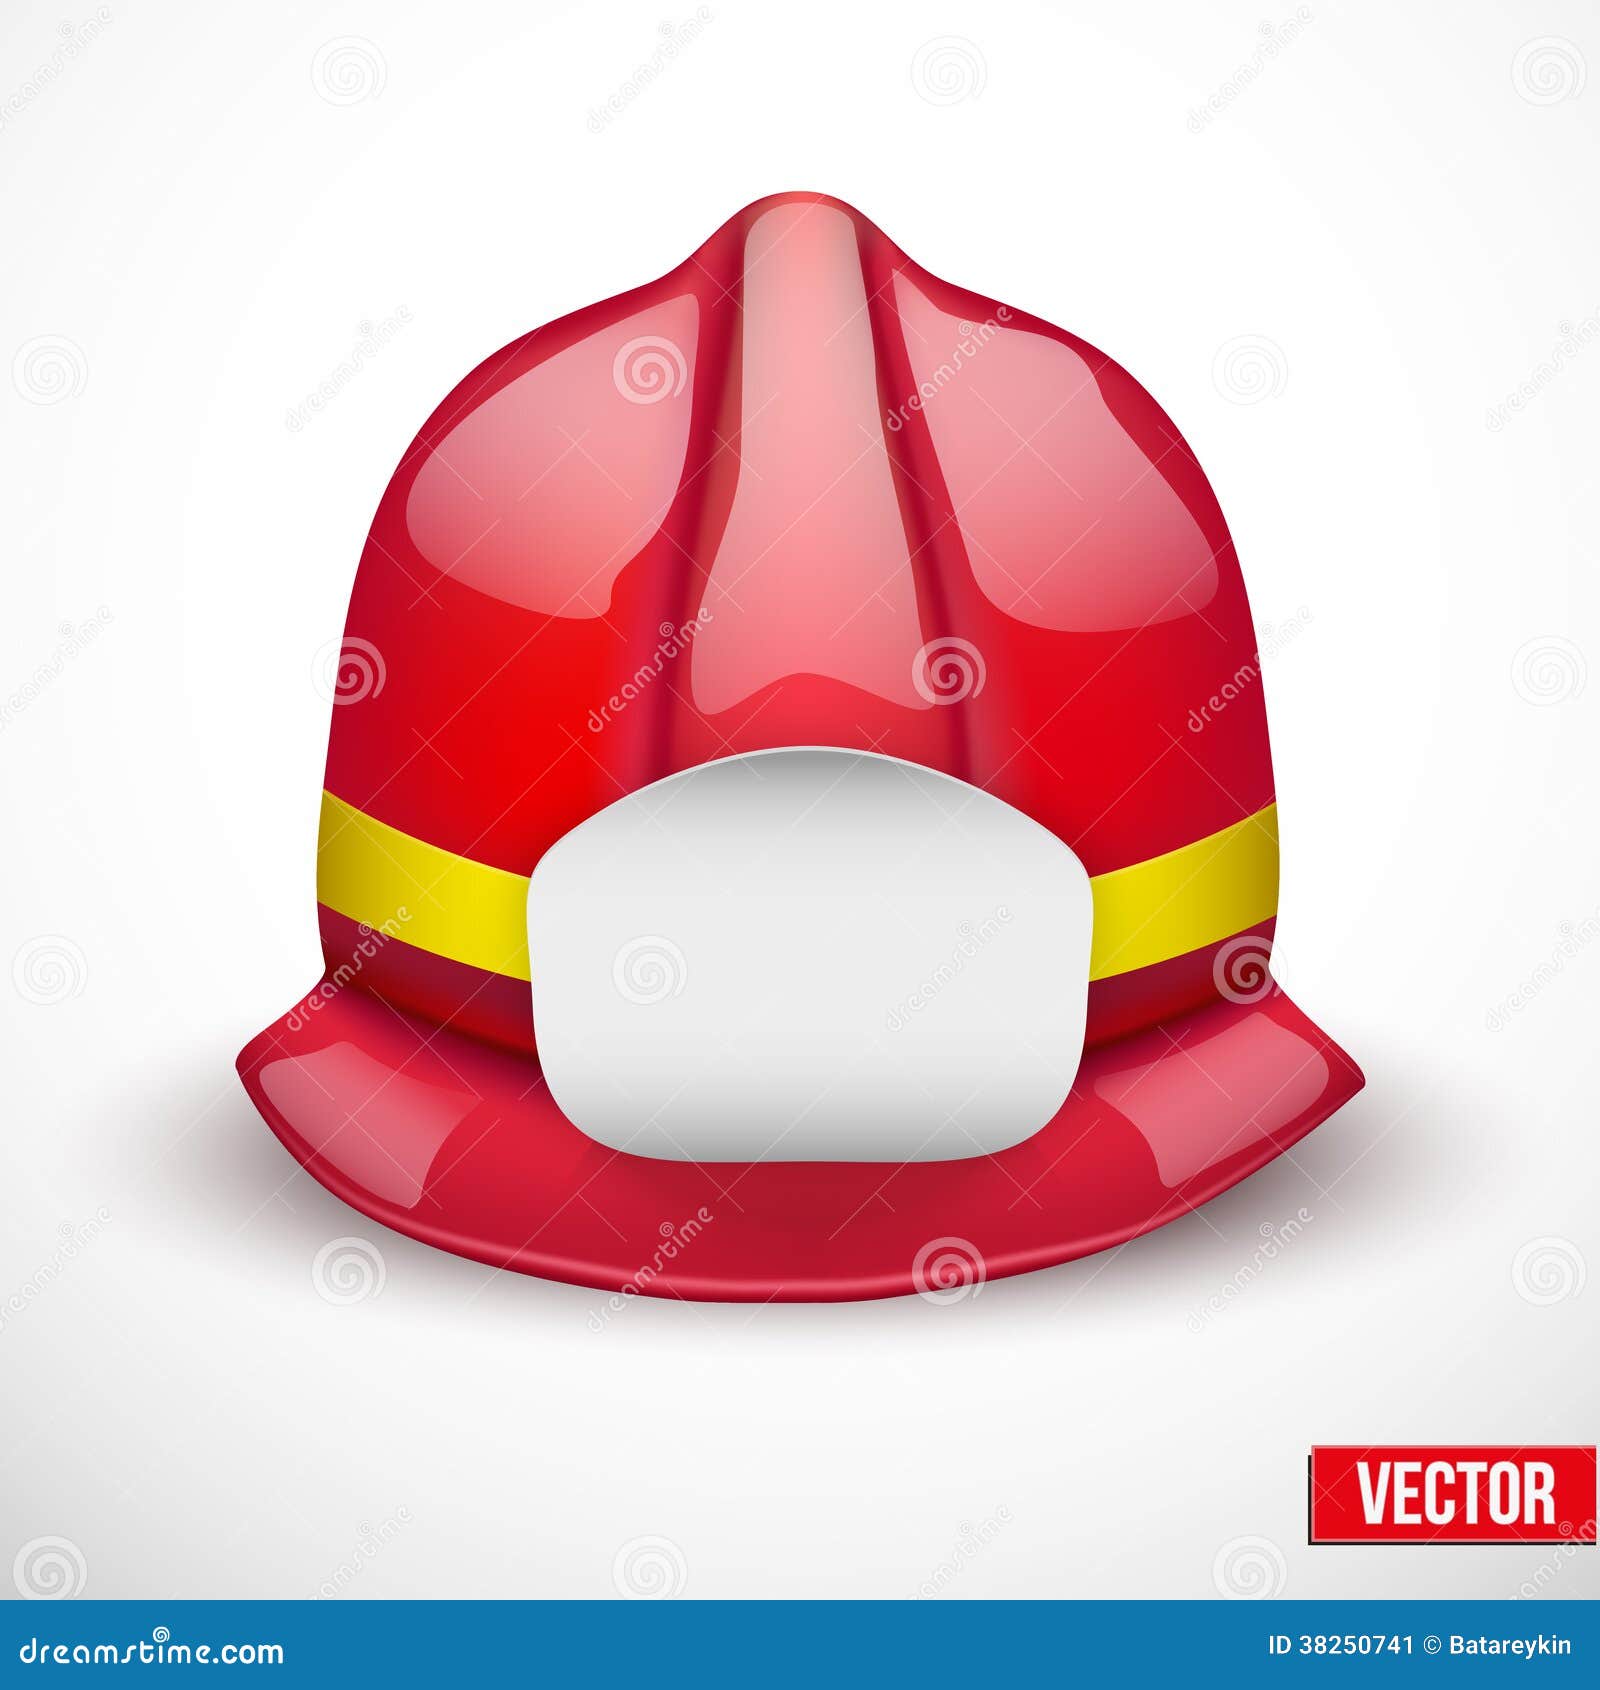 firefighter hat clipart - photo #37